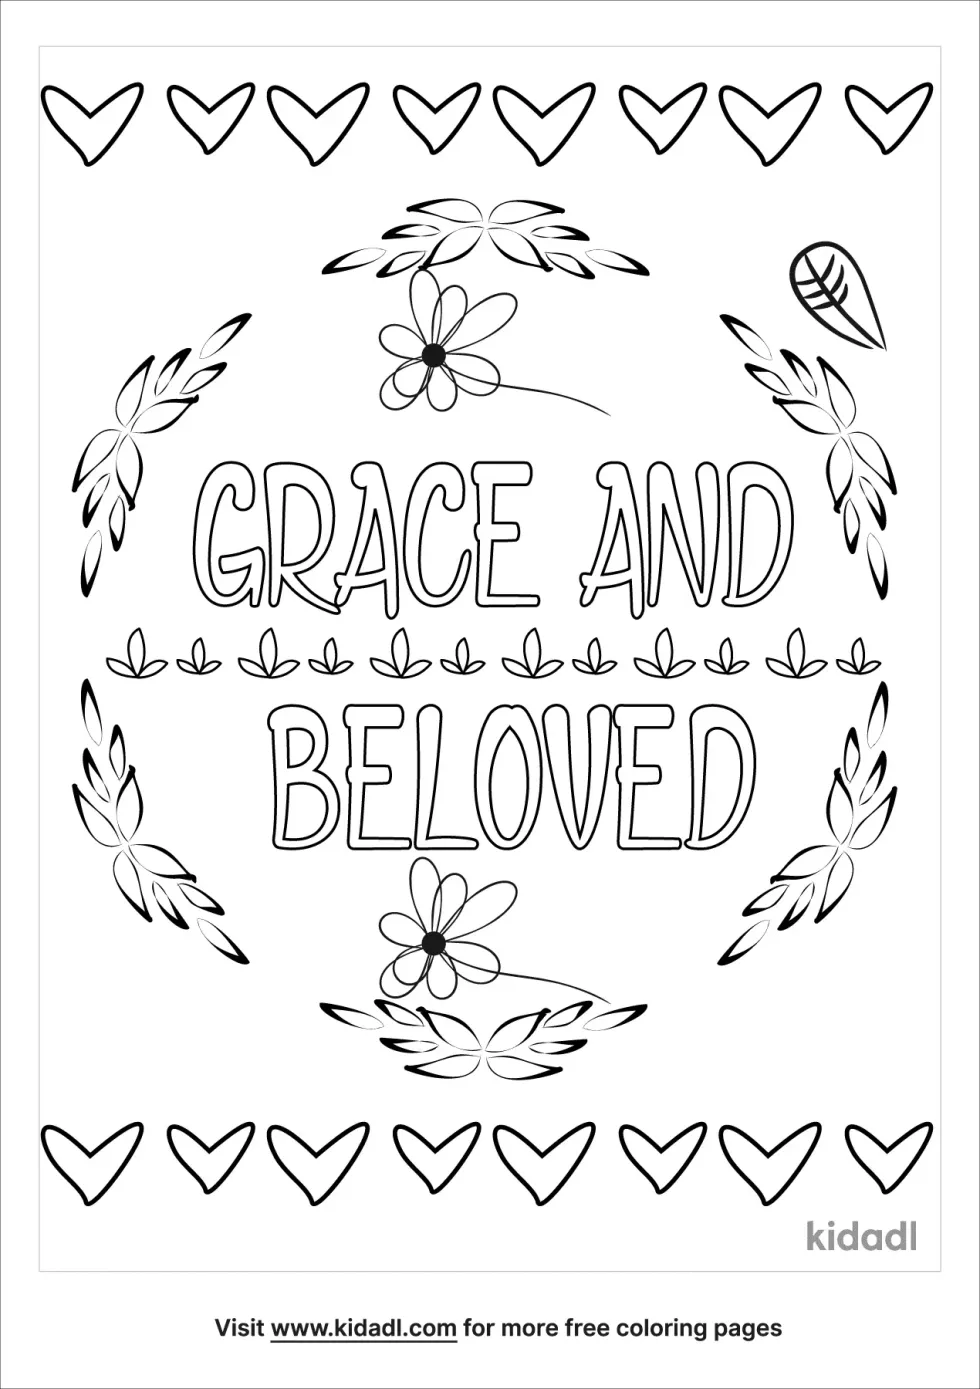 Grace And Beloved